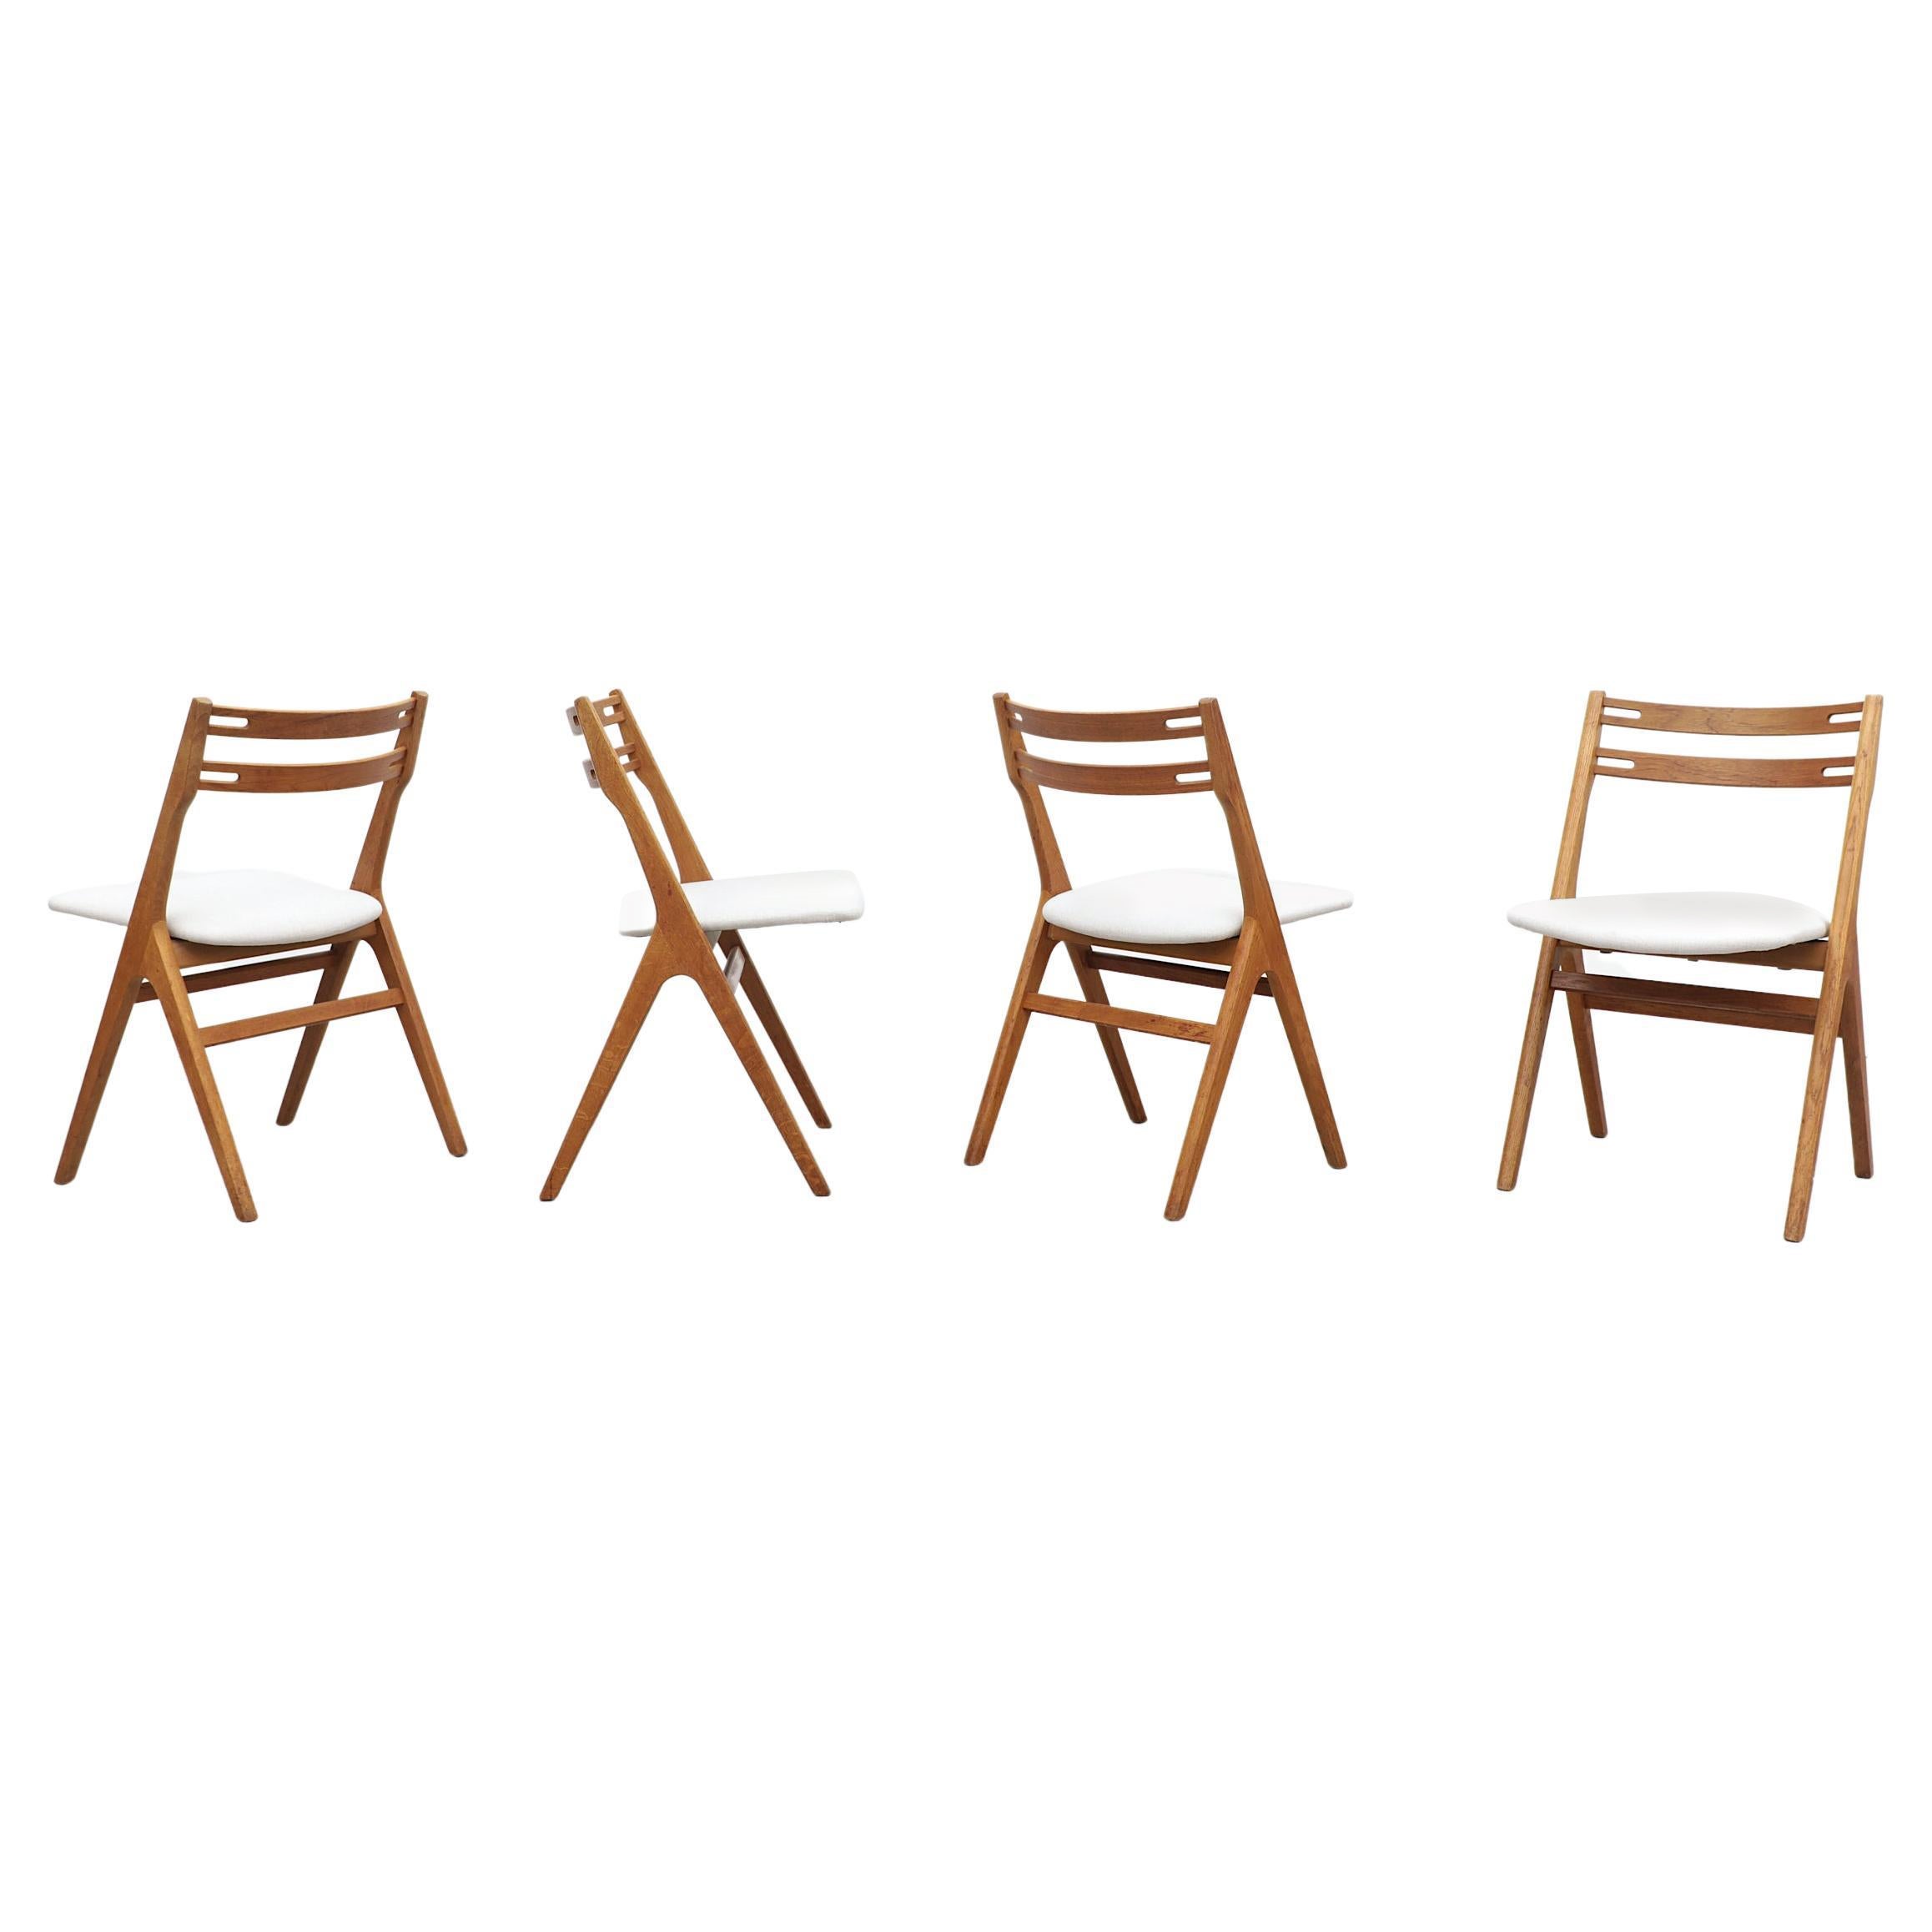 Set of 4 Hans Wegner Inspired Oak Dining Chairs by Sibast with White Seats For Sale